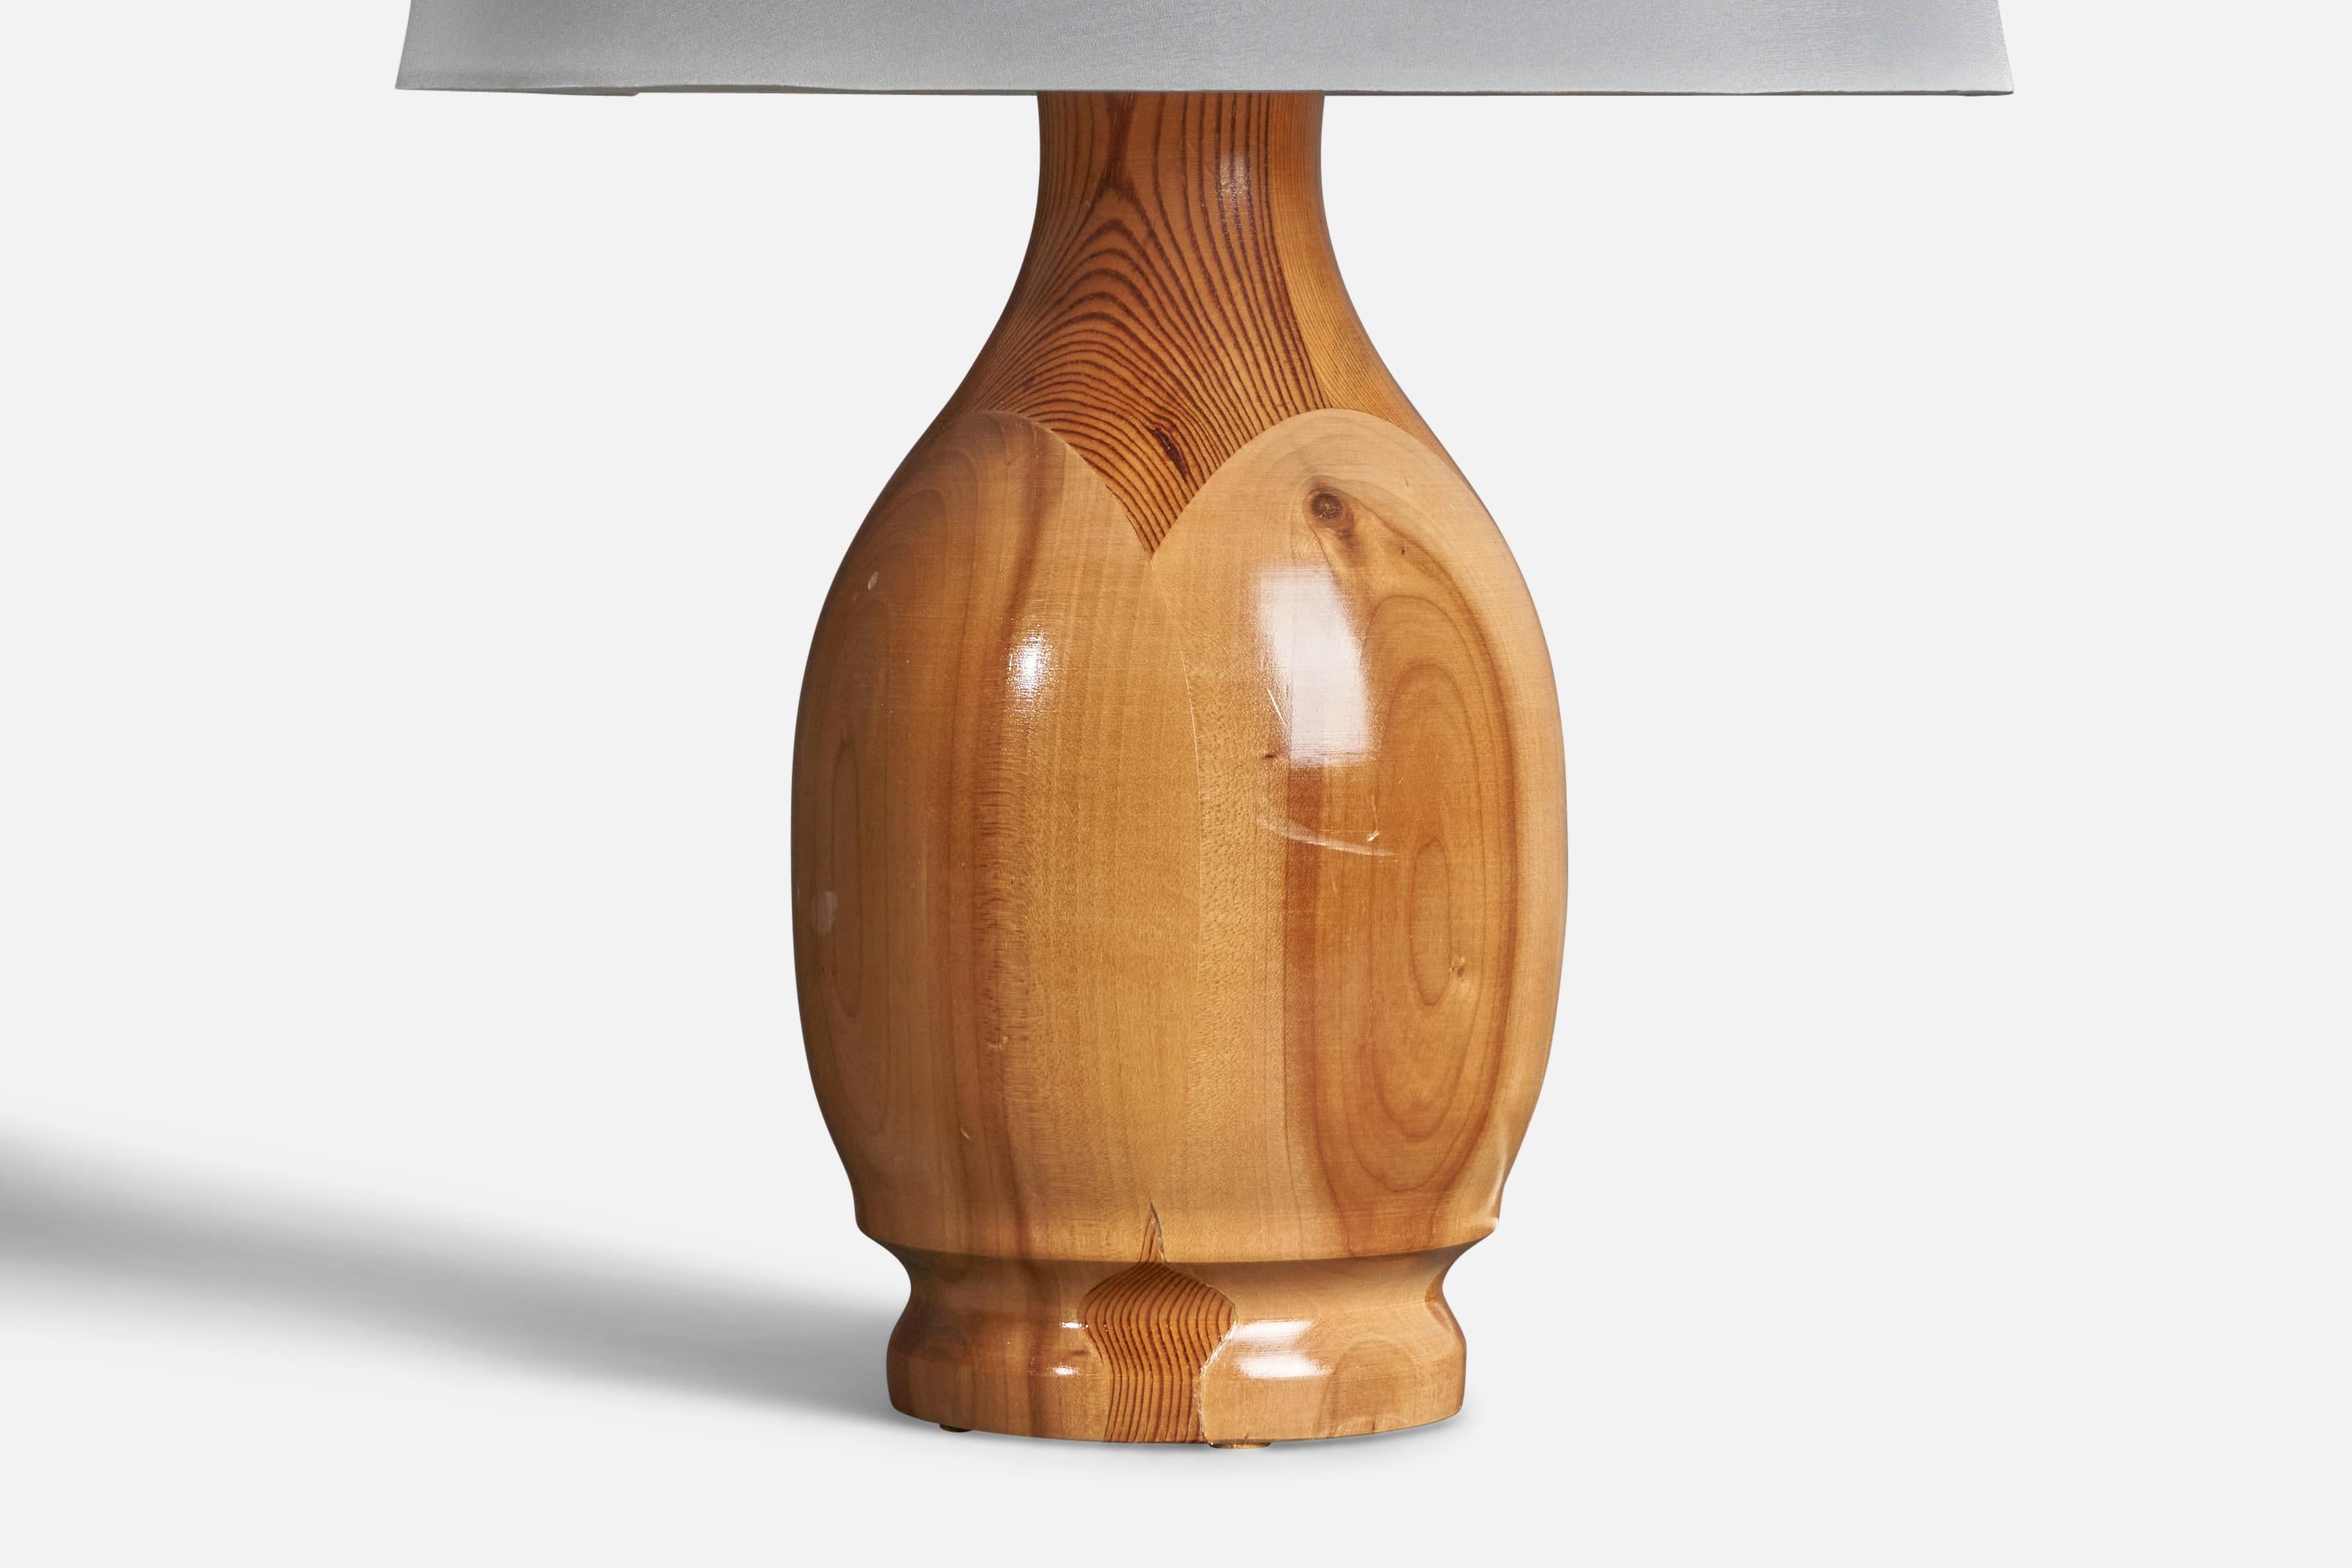 A table lamp designed and produced in Sweden, dated 1989. In solid pine.

Condition: Good 
Wear consistent with age and use.

Dimensions of Lamp (inches): 15” H x 6” Diameter

Dimensions of Shade (inches): 9” Top Diameter x 12” Bottom Diameter x 9”